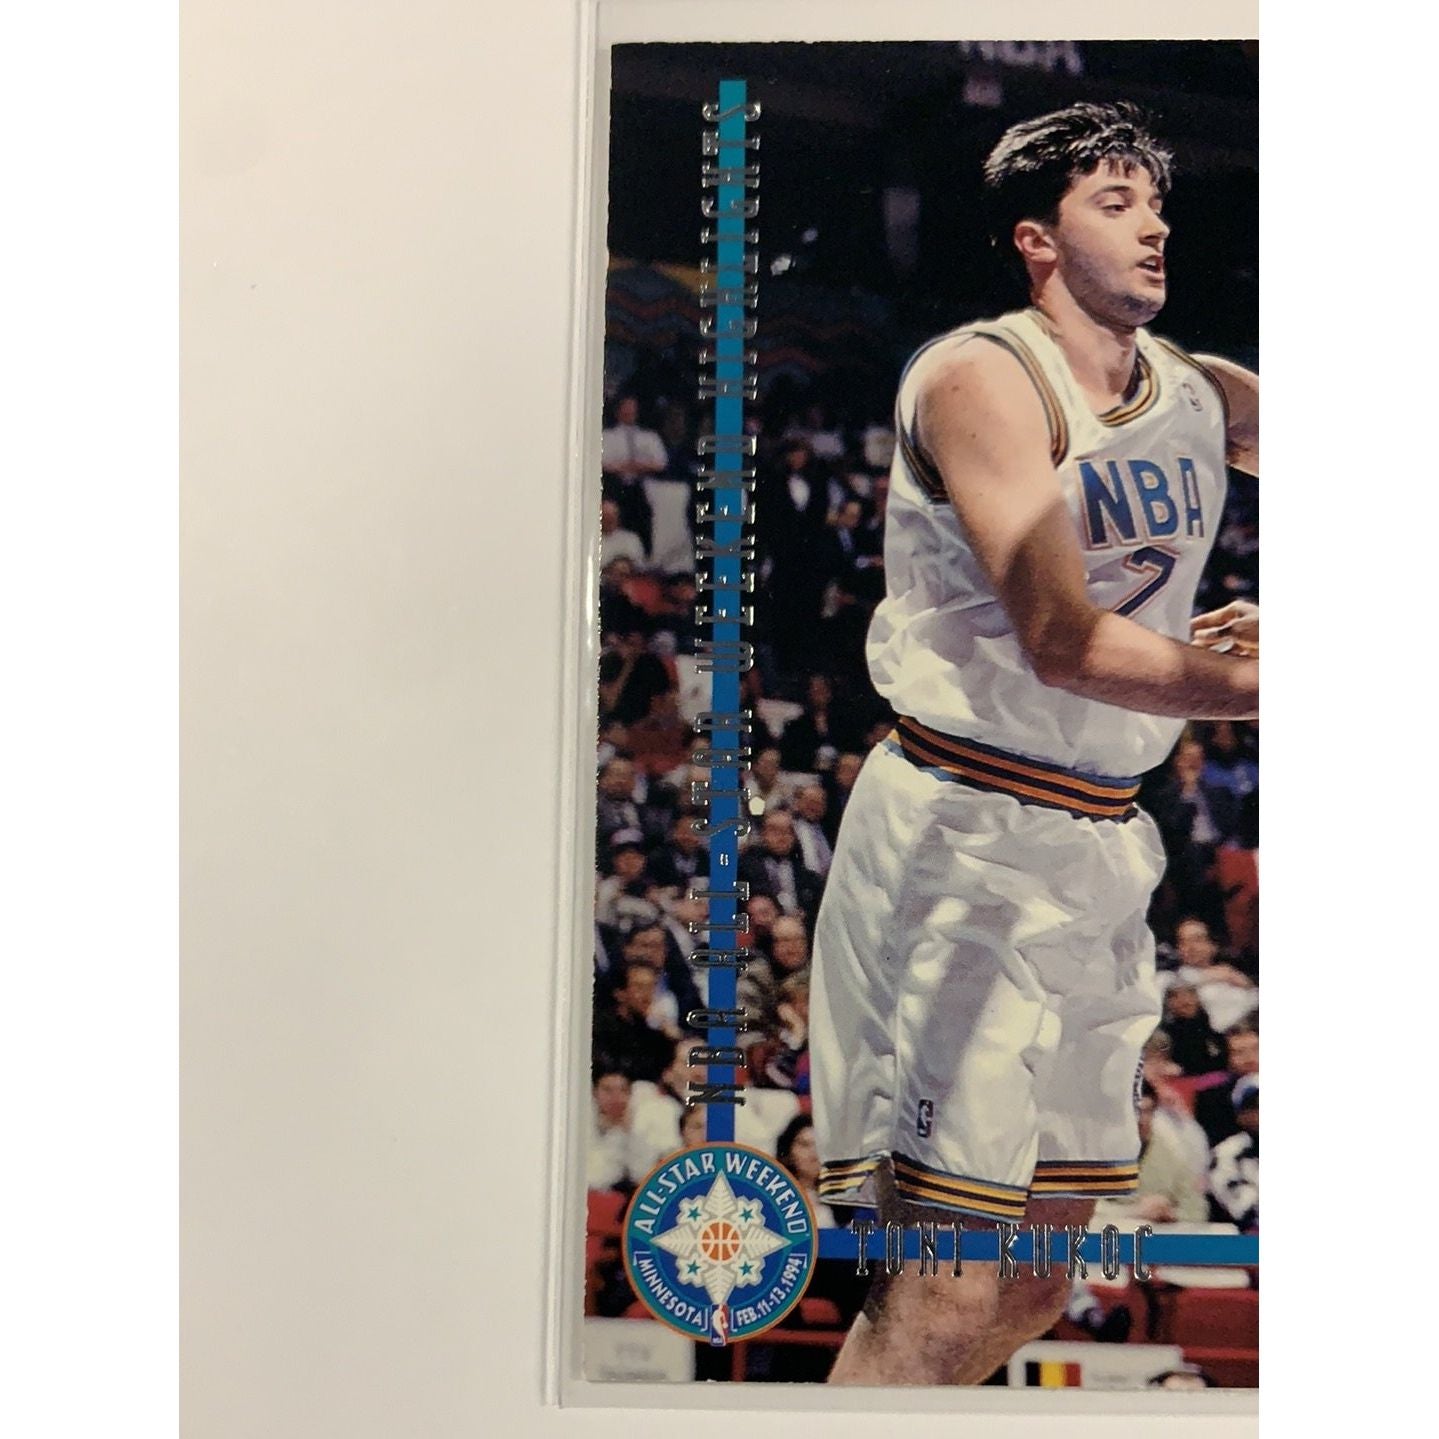  1994 Upper Deck Toni Kukoc All Star Weekend Highlights NBA Rookie Game  Local Legends Cards & Collectibles